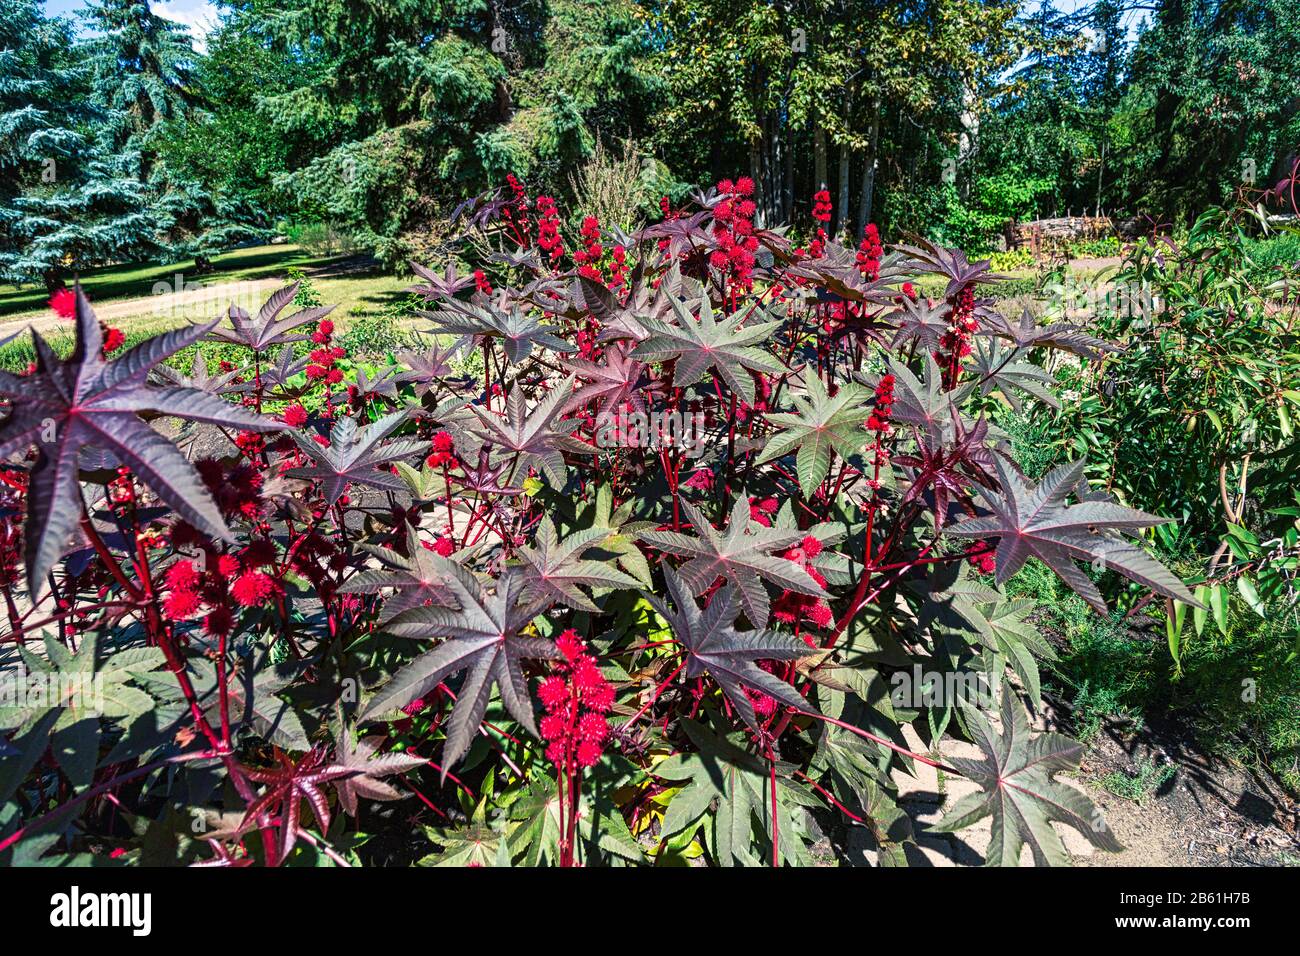 Castor oil plant has glossy leaves with long stems and red flowers Stock Photo